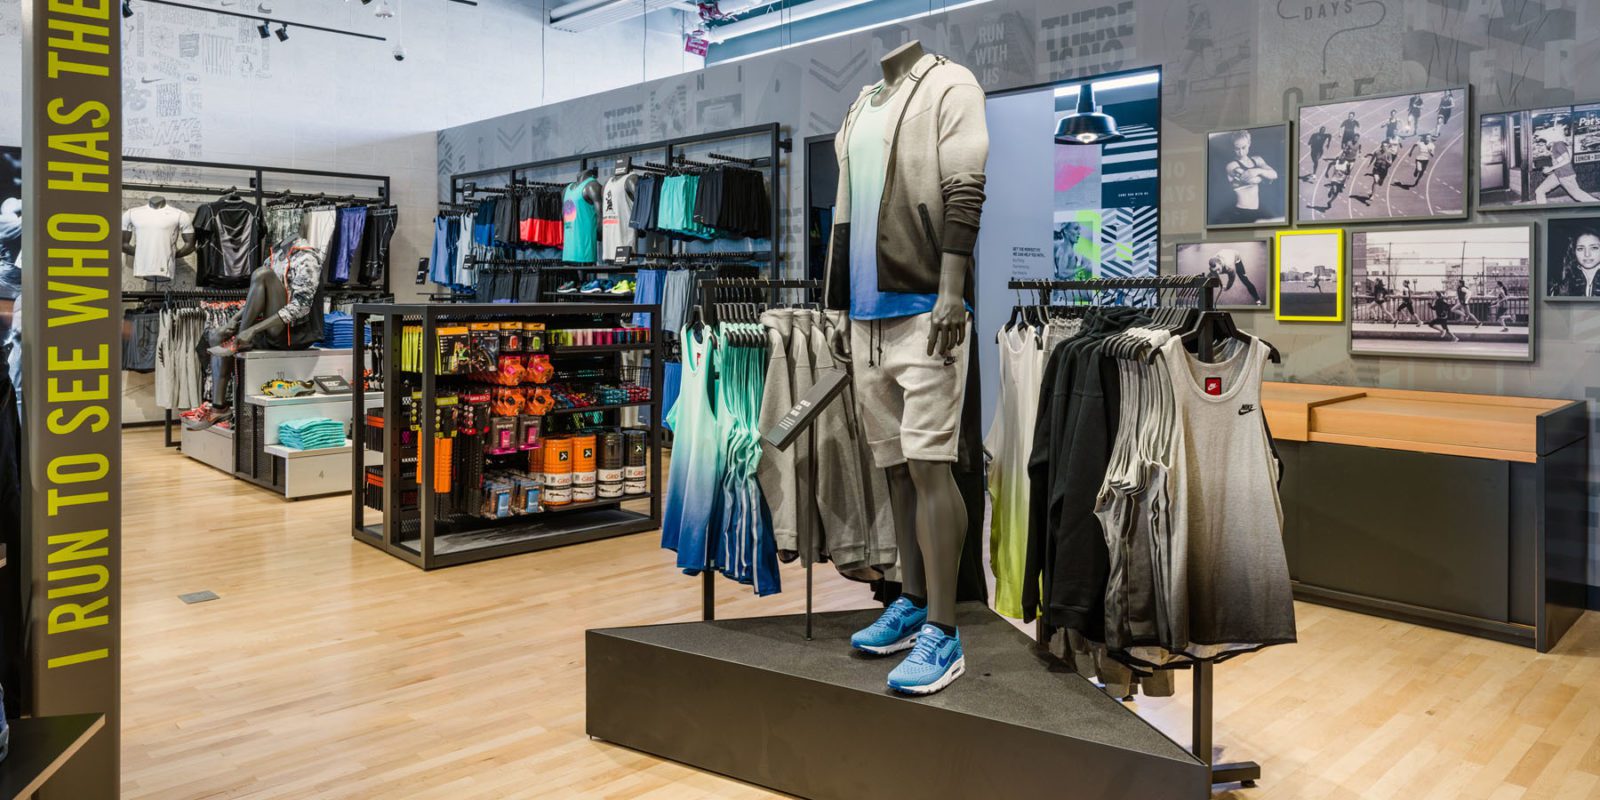 Nike store branded environment featuring a clothing display